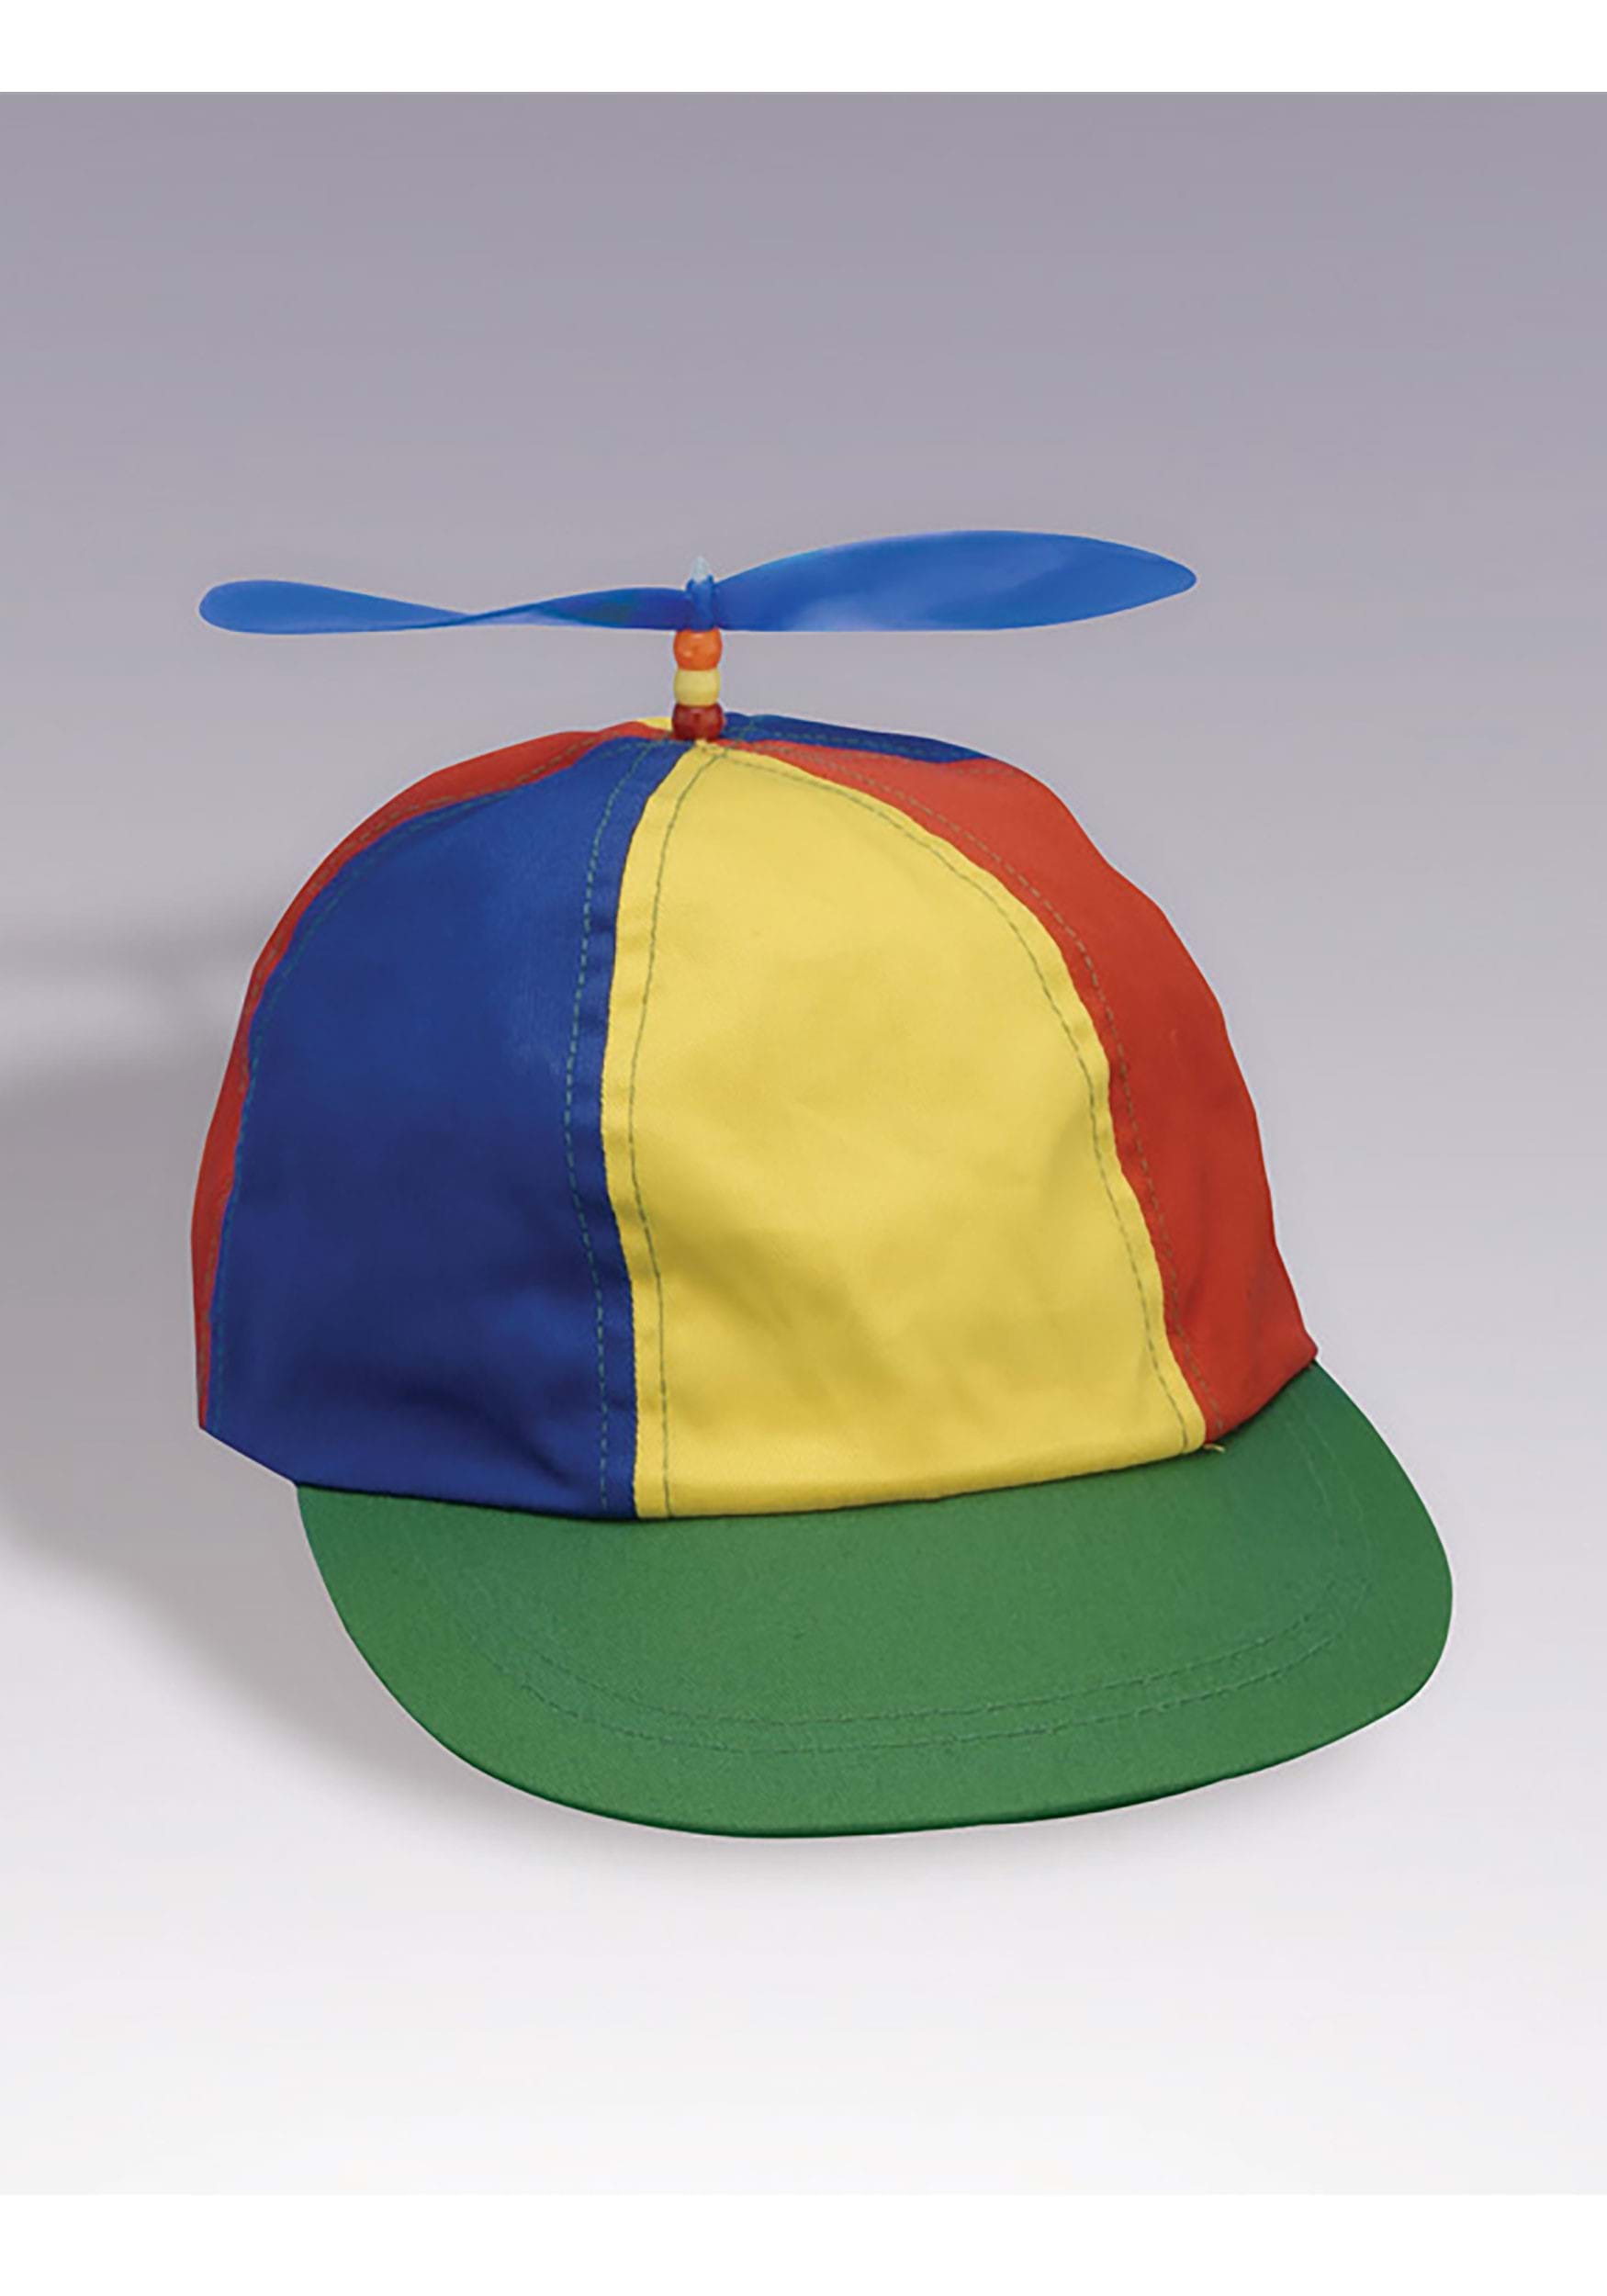 https://images.halloweencostumes.com/products/92376/1-1/multi-color-propeller-hat.jpg